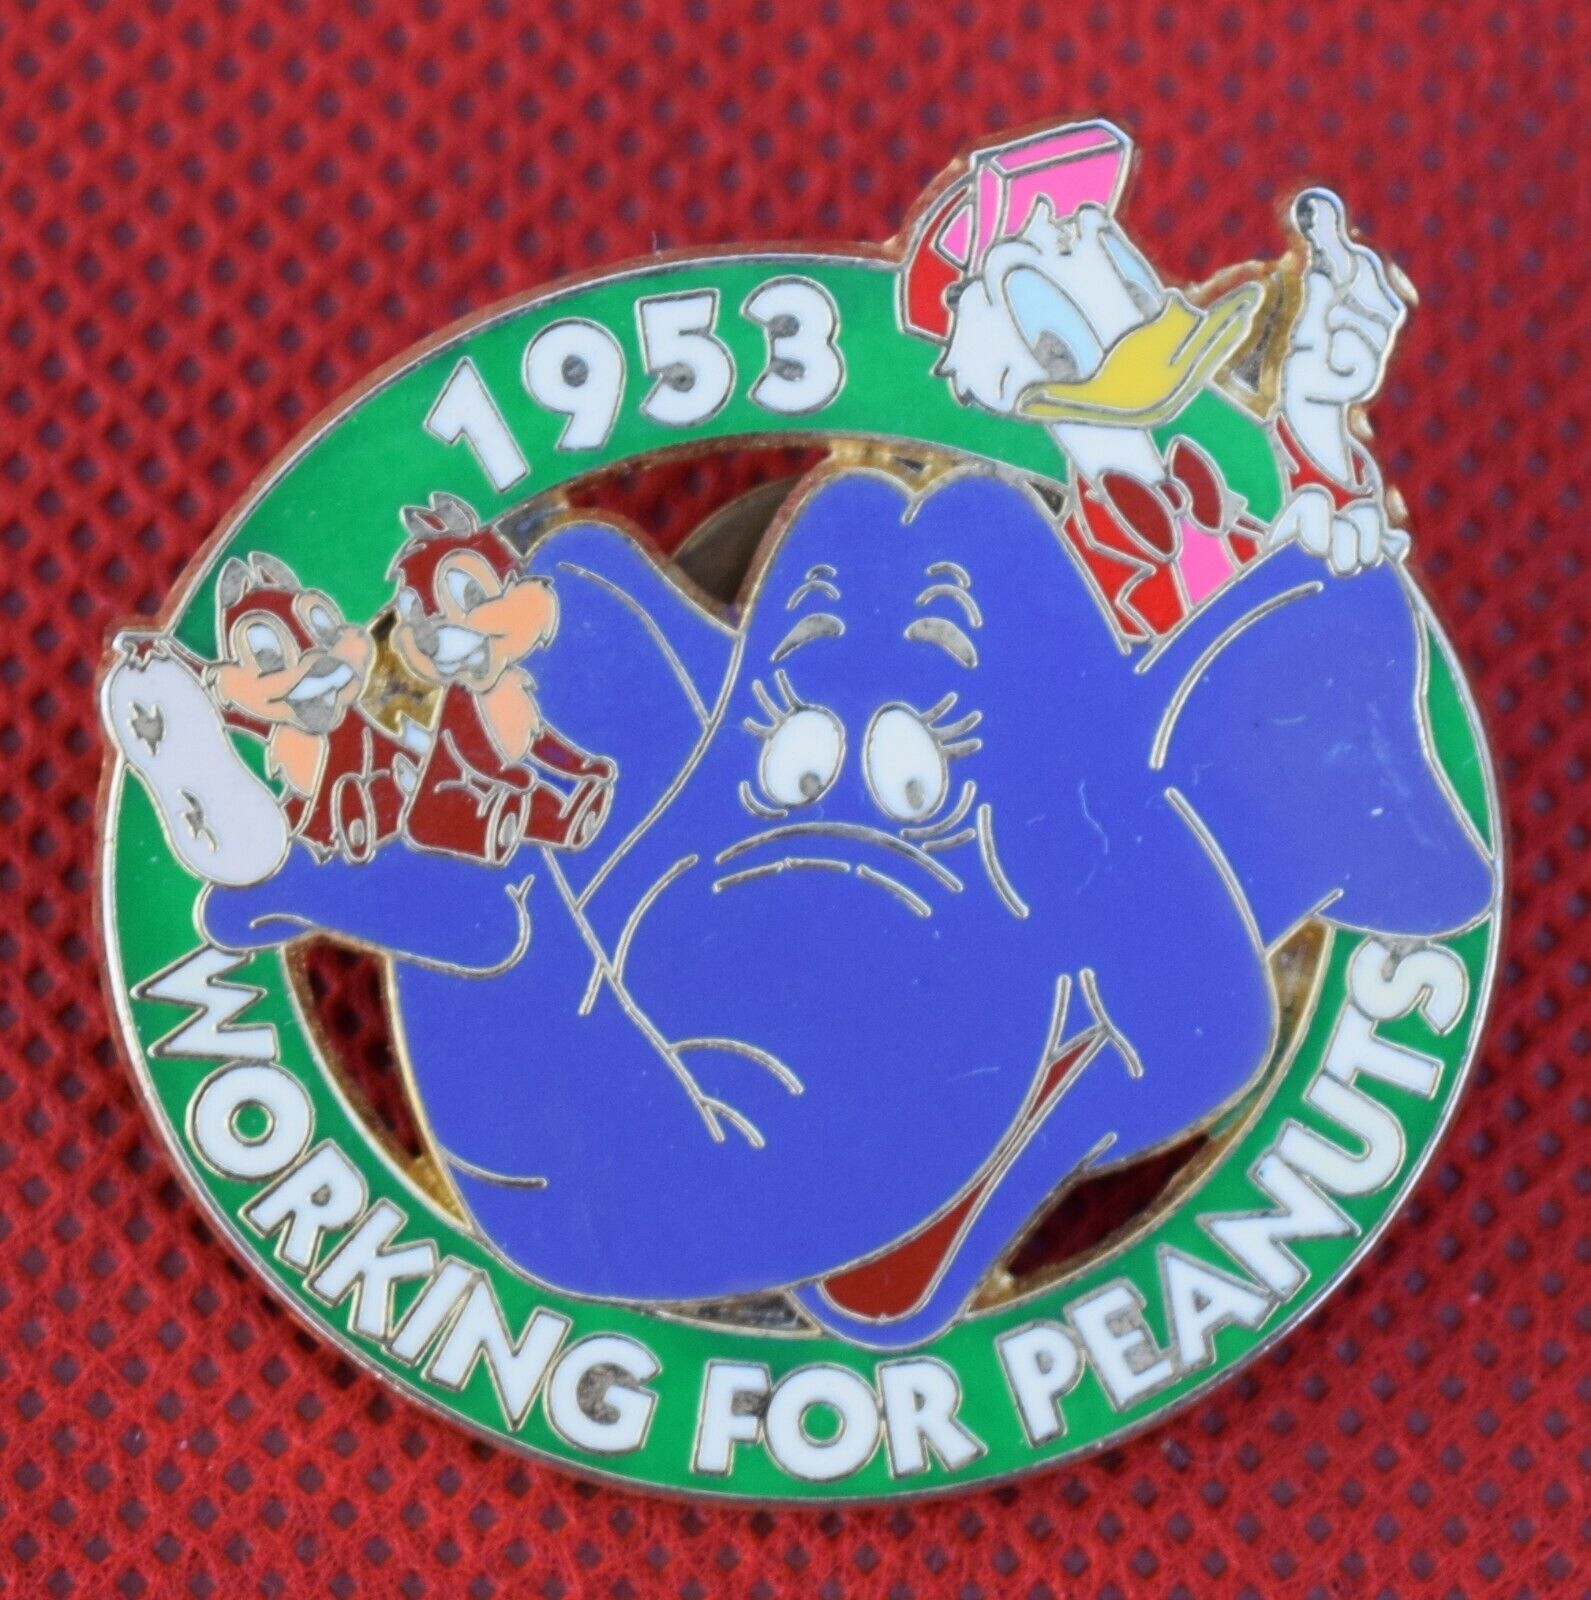  Disney WORKING FOR PEANUTS 100 Years of Dreams Pin - Retired Chip & Dale Pins